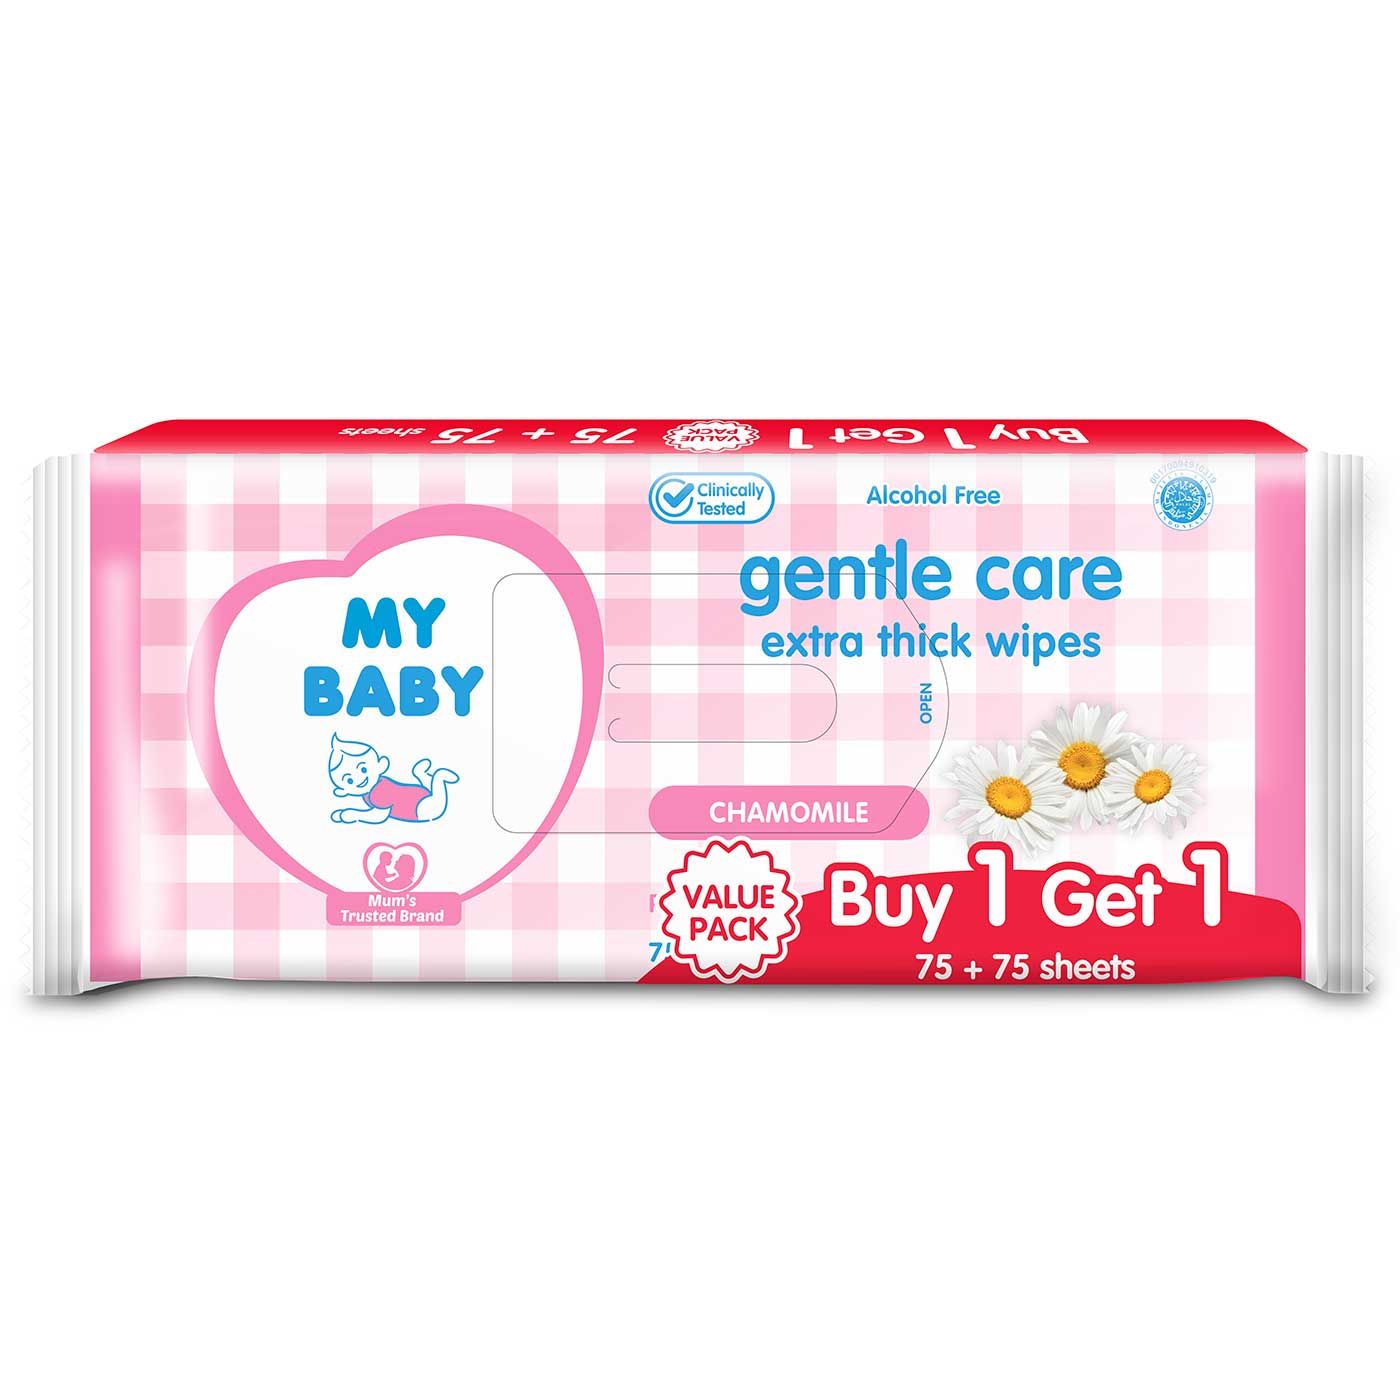 My Baby Extra Thick Wipes Gentle Care 75+75 Sheets Tisu Basah - 2